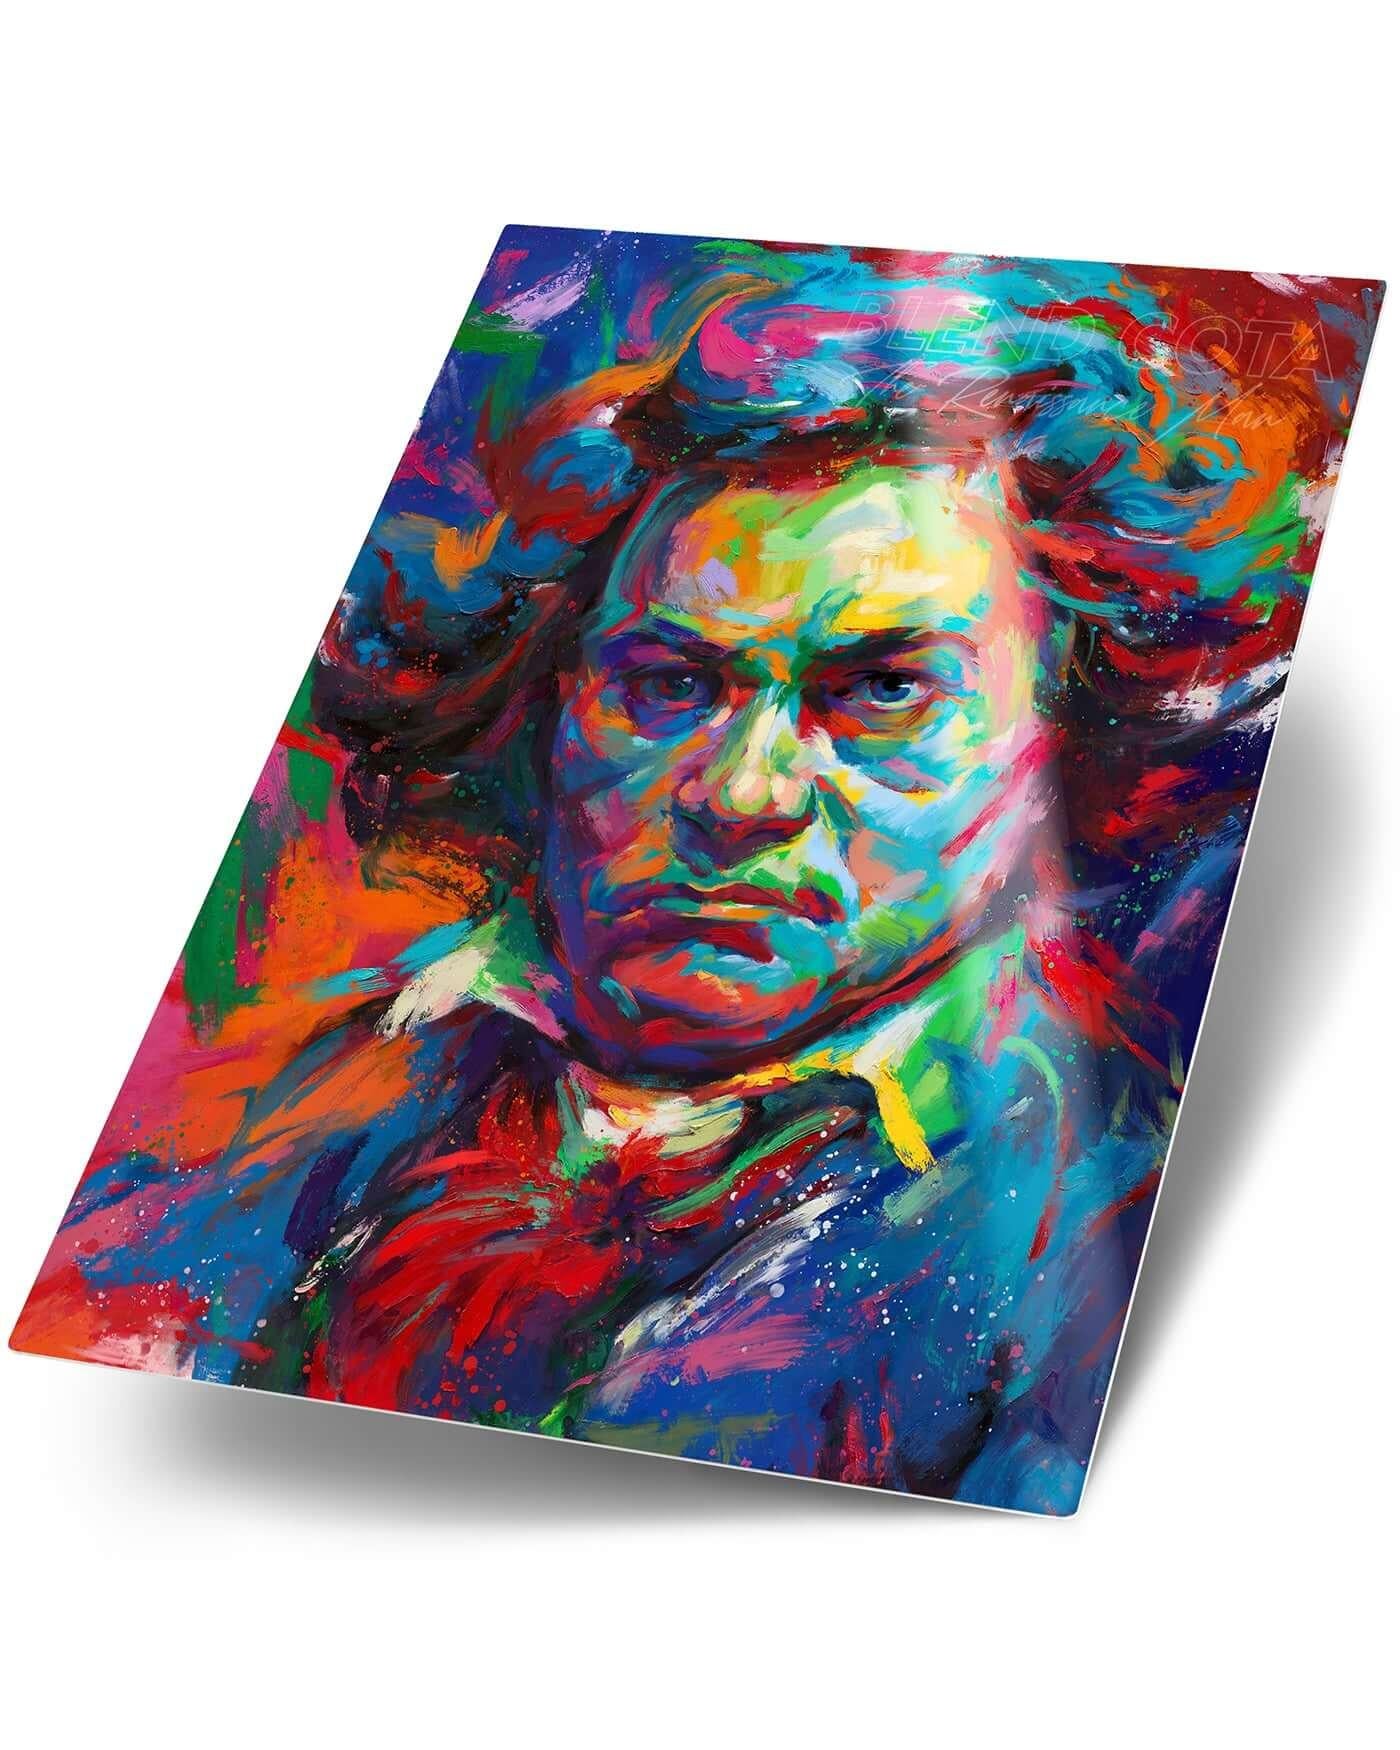 Beethoven - A Symphony of Color (Limited Edition on Metal) - Pop Art Print by Blend Cota